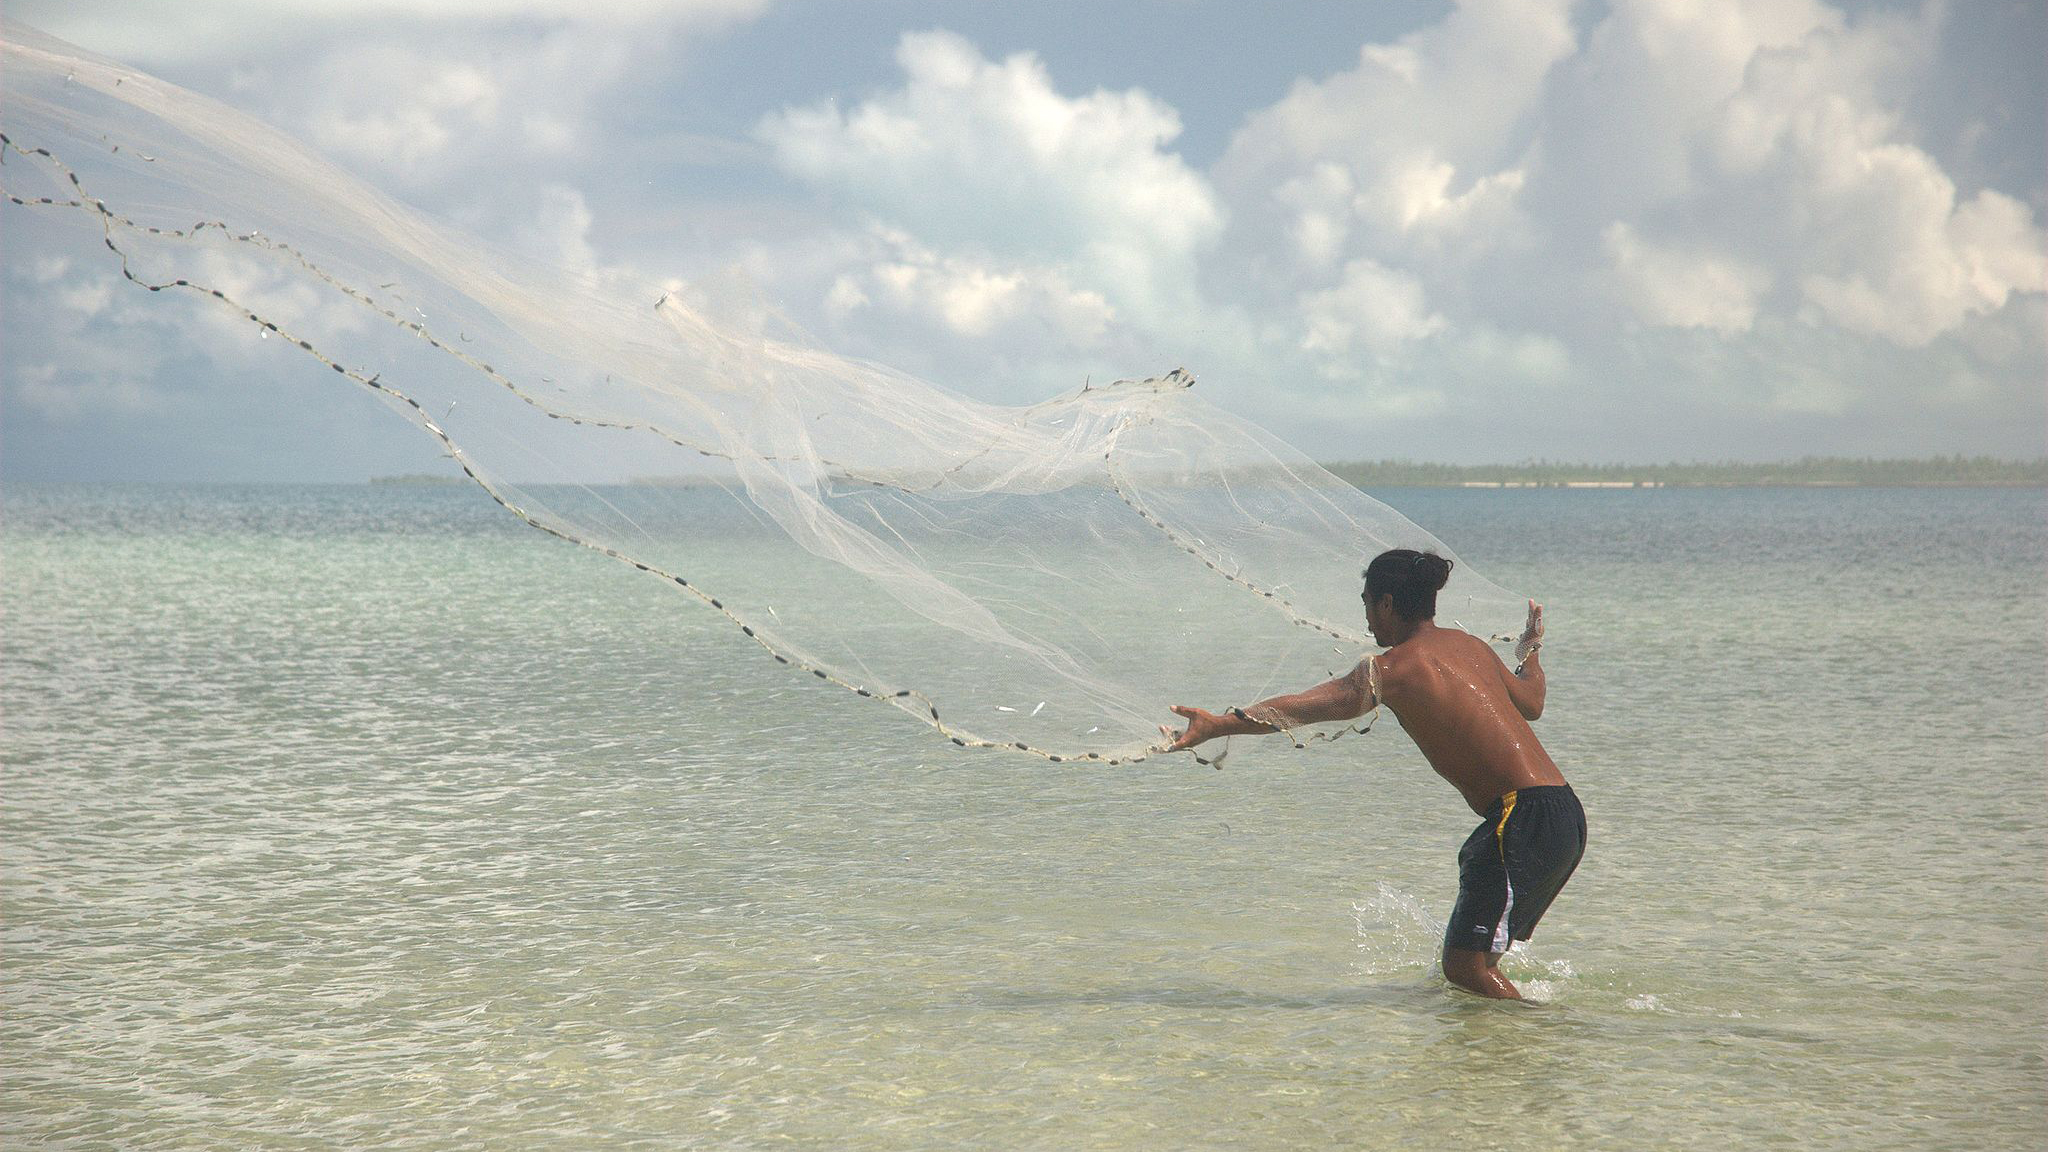 Kiribati fisherman. Photo © Department of Foreign Affairs and Trade [CC BY 2.0], via Wikimedia Commons